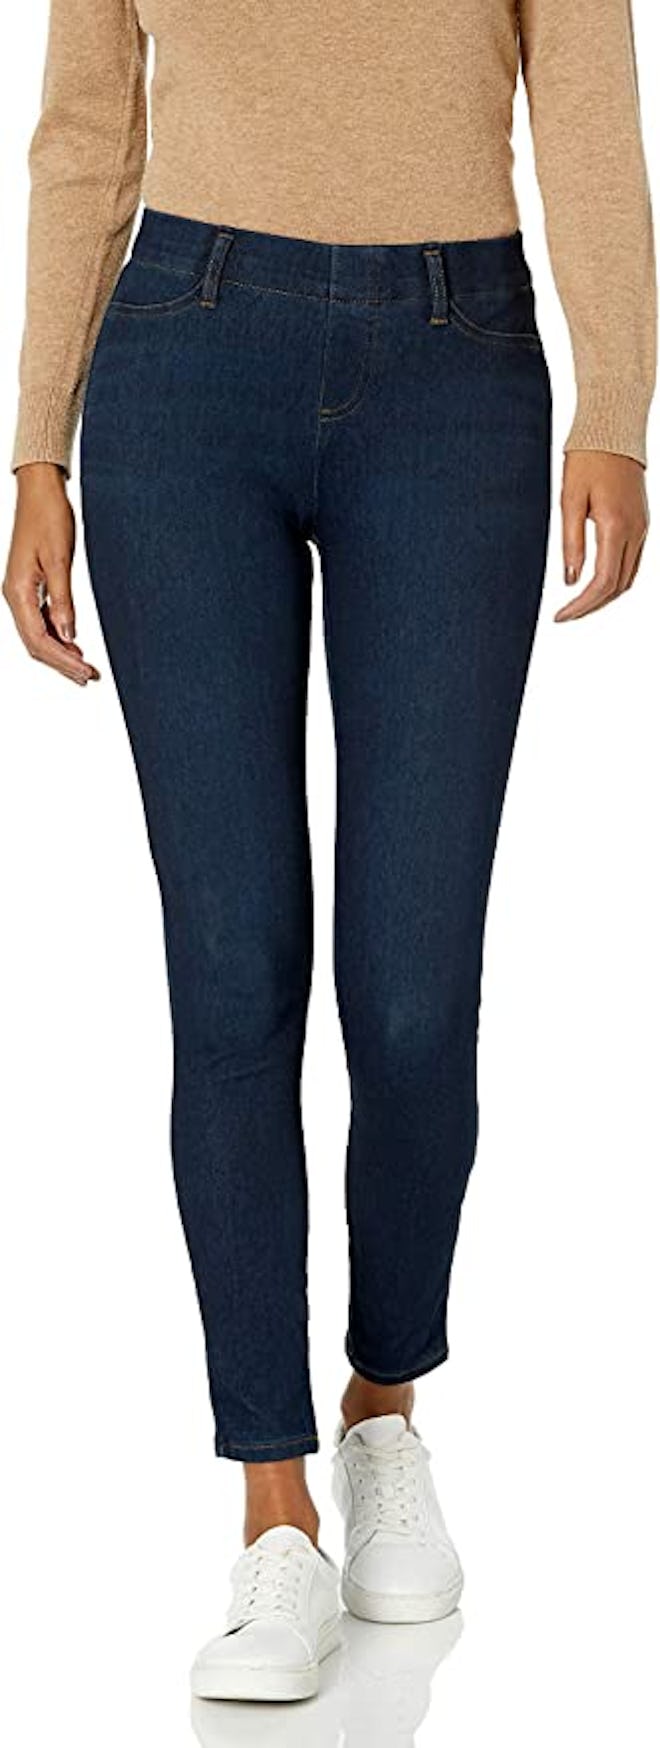 Amazon Essentials Pull-On Knit Jeggings